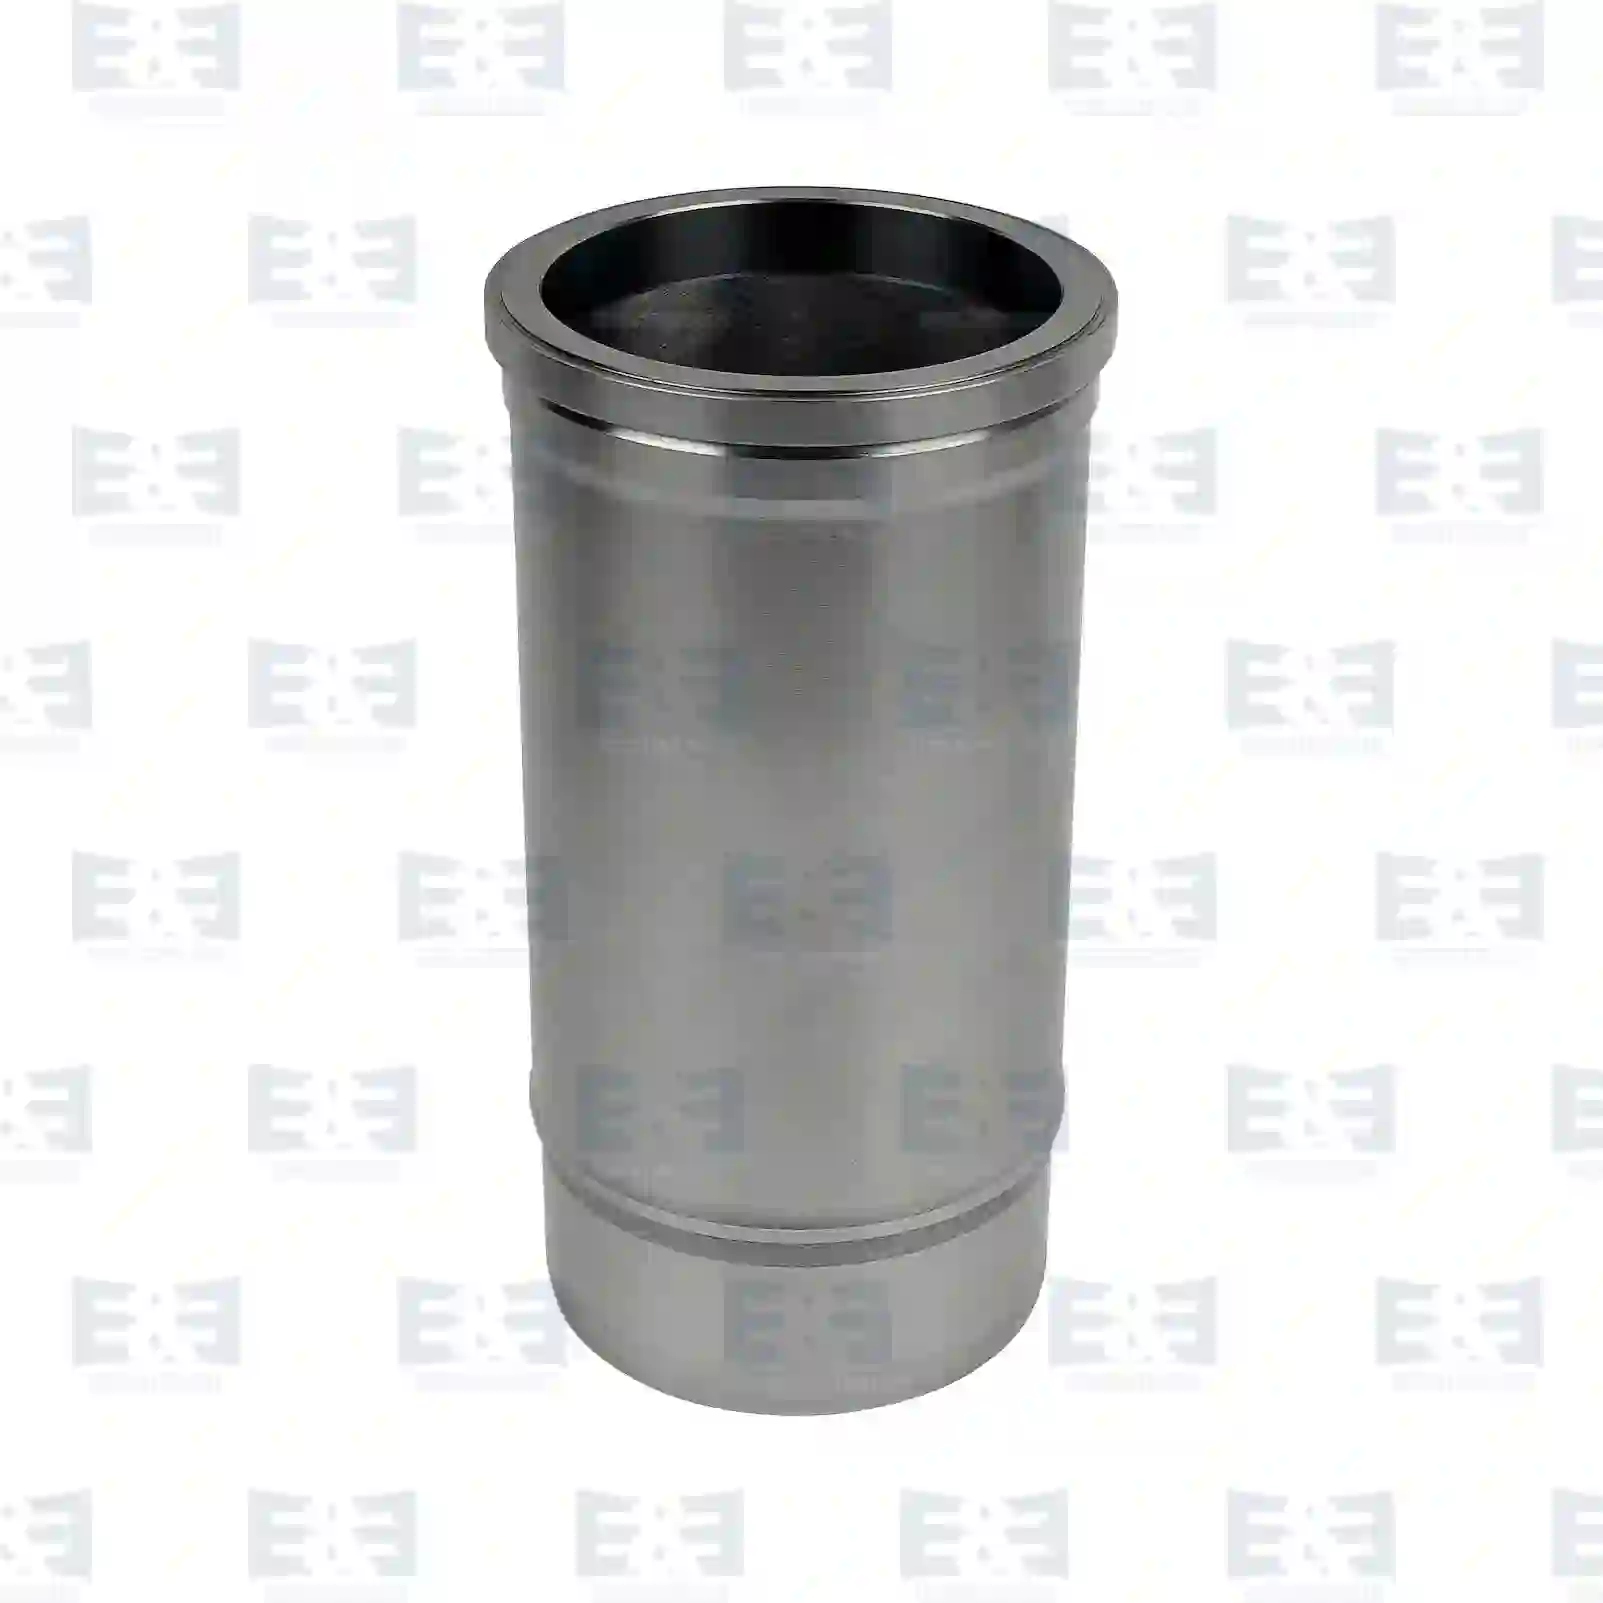 Cylinder liner, without seal rings, 2E2200425, 1319247, 348967, ZG01074-0008 ||  2E2200425 E&E Truck Spare Parts | Truck Spare Parts, Auotomotive Spare Parts Cylinder liner, without seal rings, 2E2200425, 1319247, 348967, ZG01074-0008 ||  2E2200425 E&E Truck Spare Parts | Truck Spare Parts, Auotomotive Spare Parts